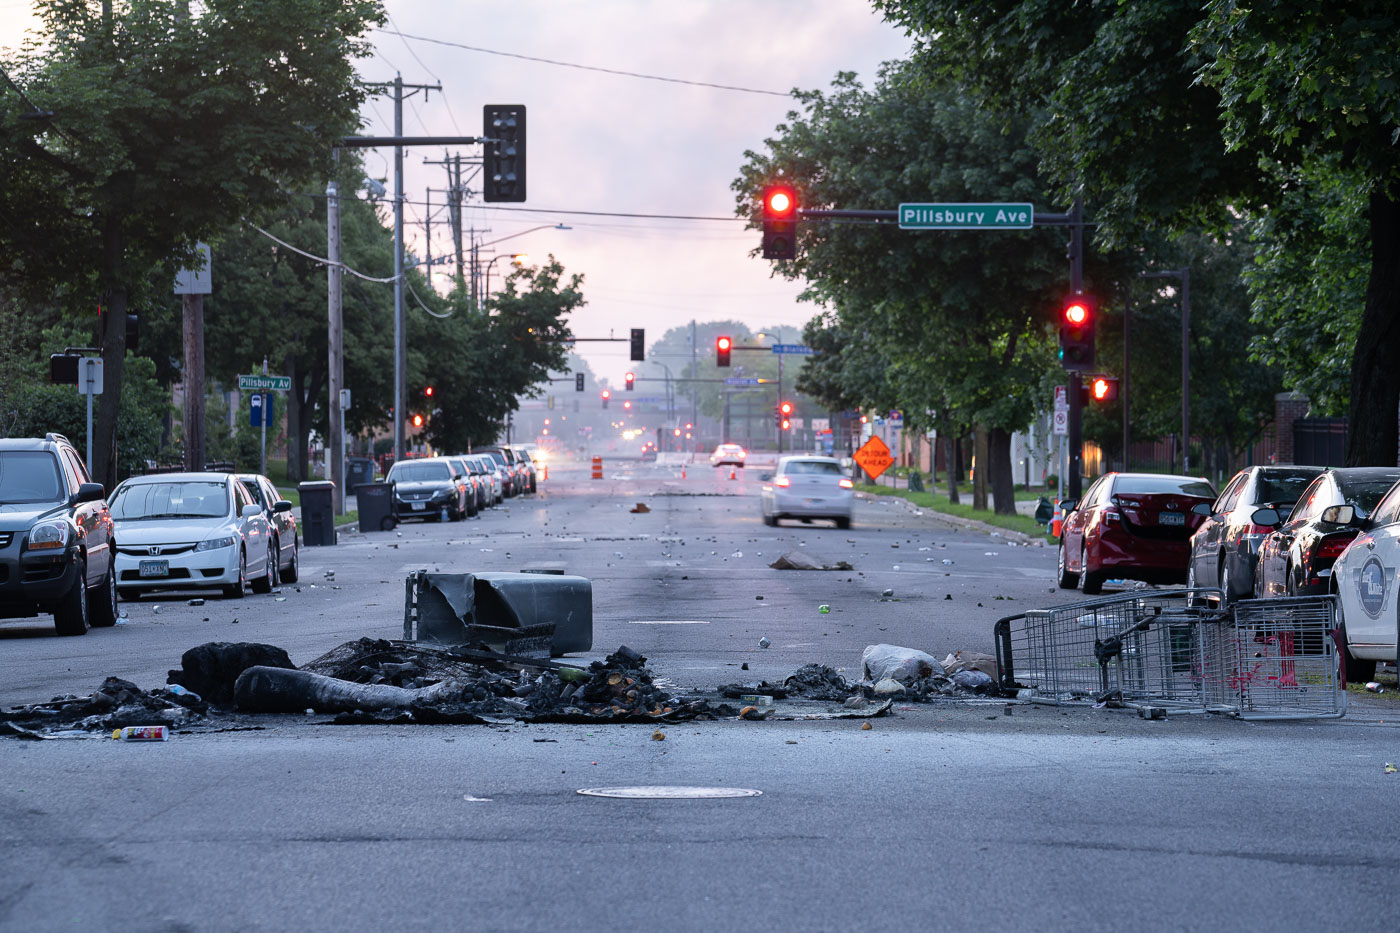 Debris in the road following a night of protest in South Minneapolis